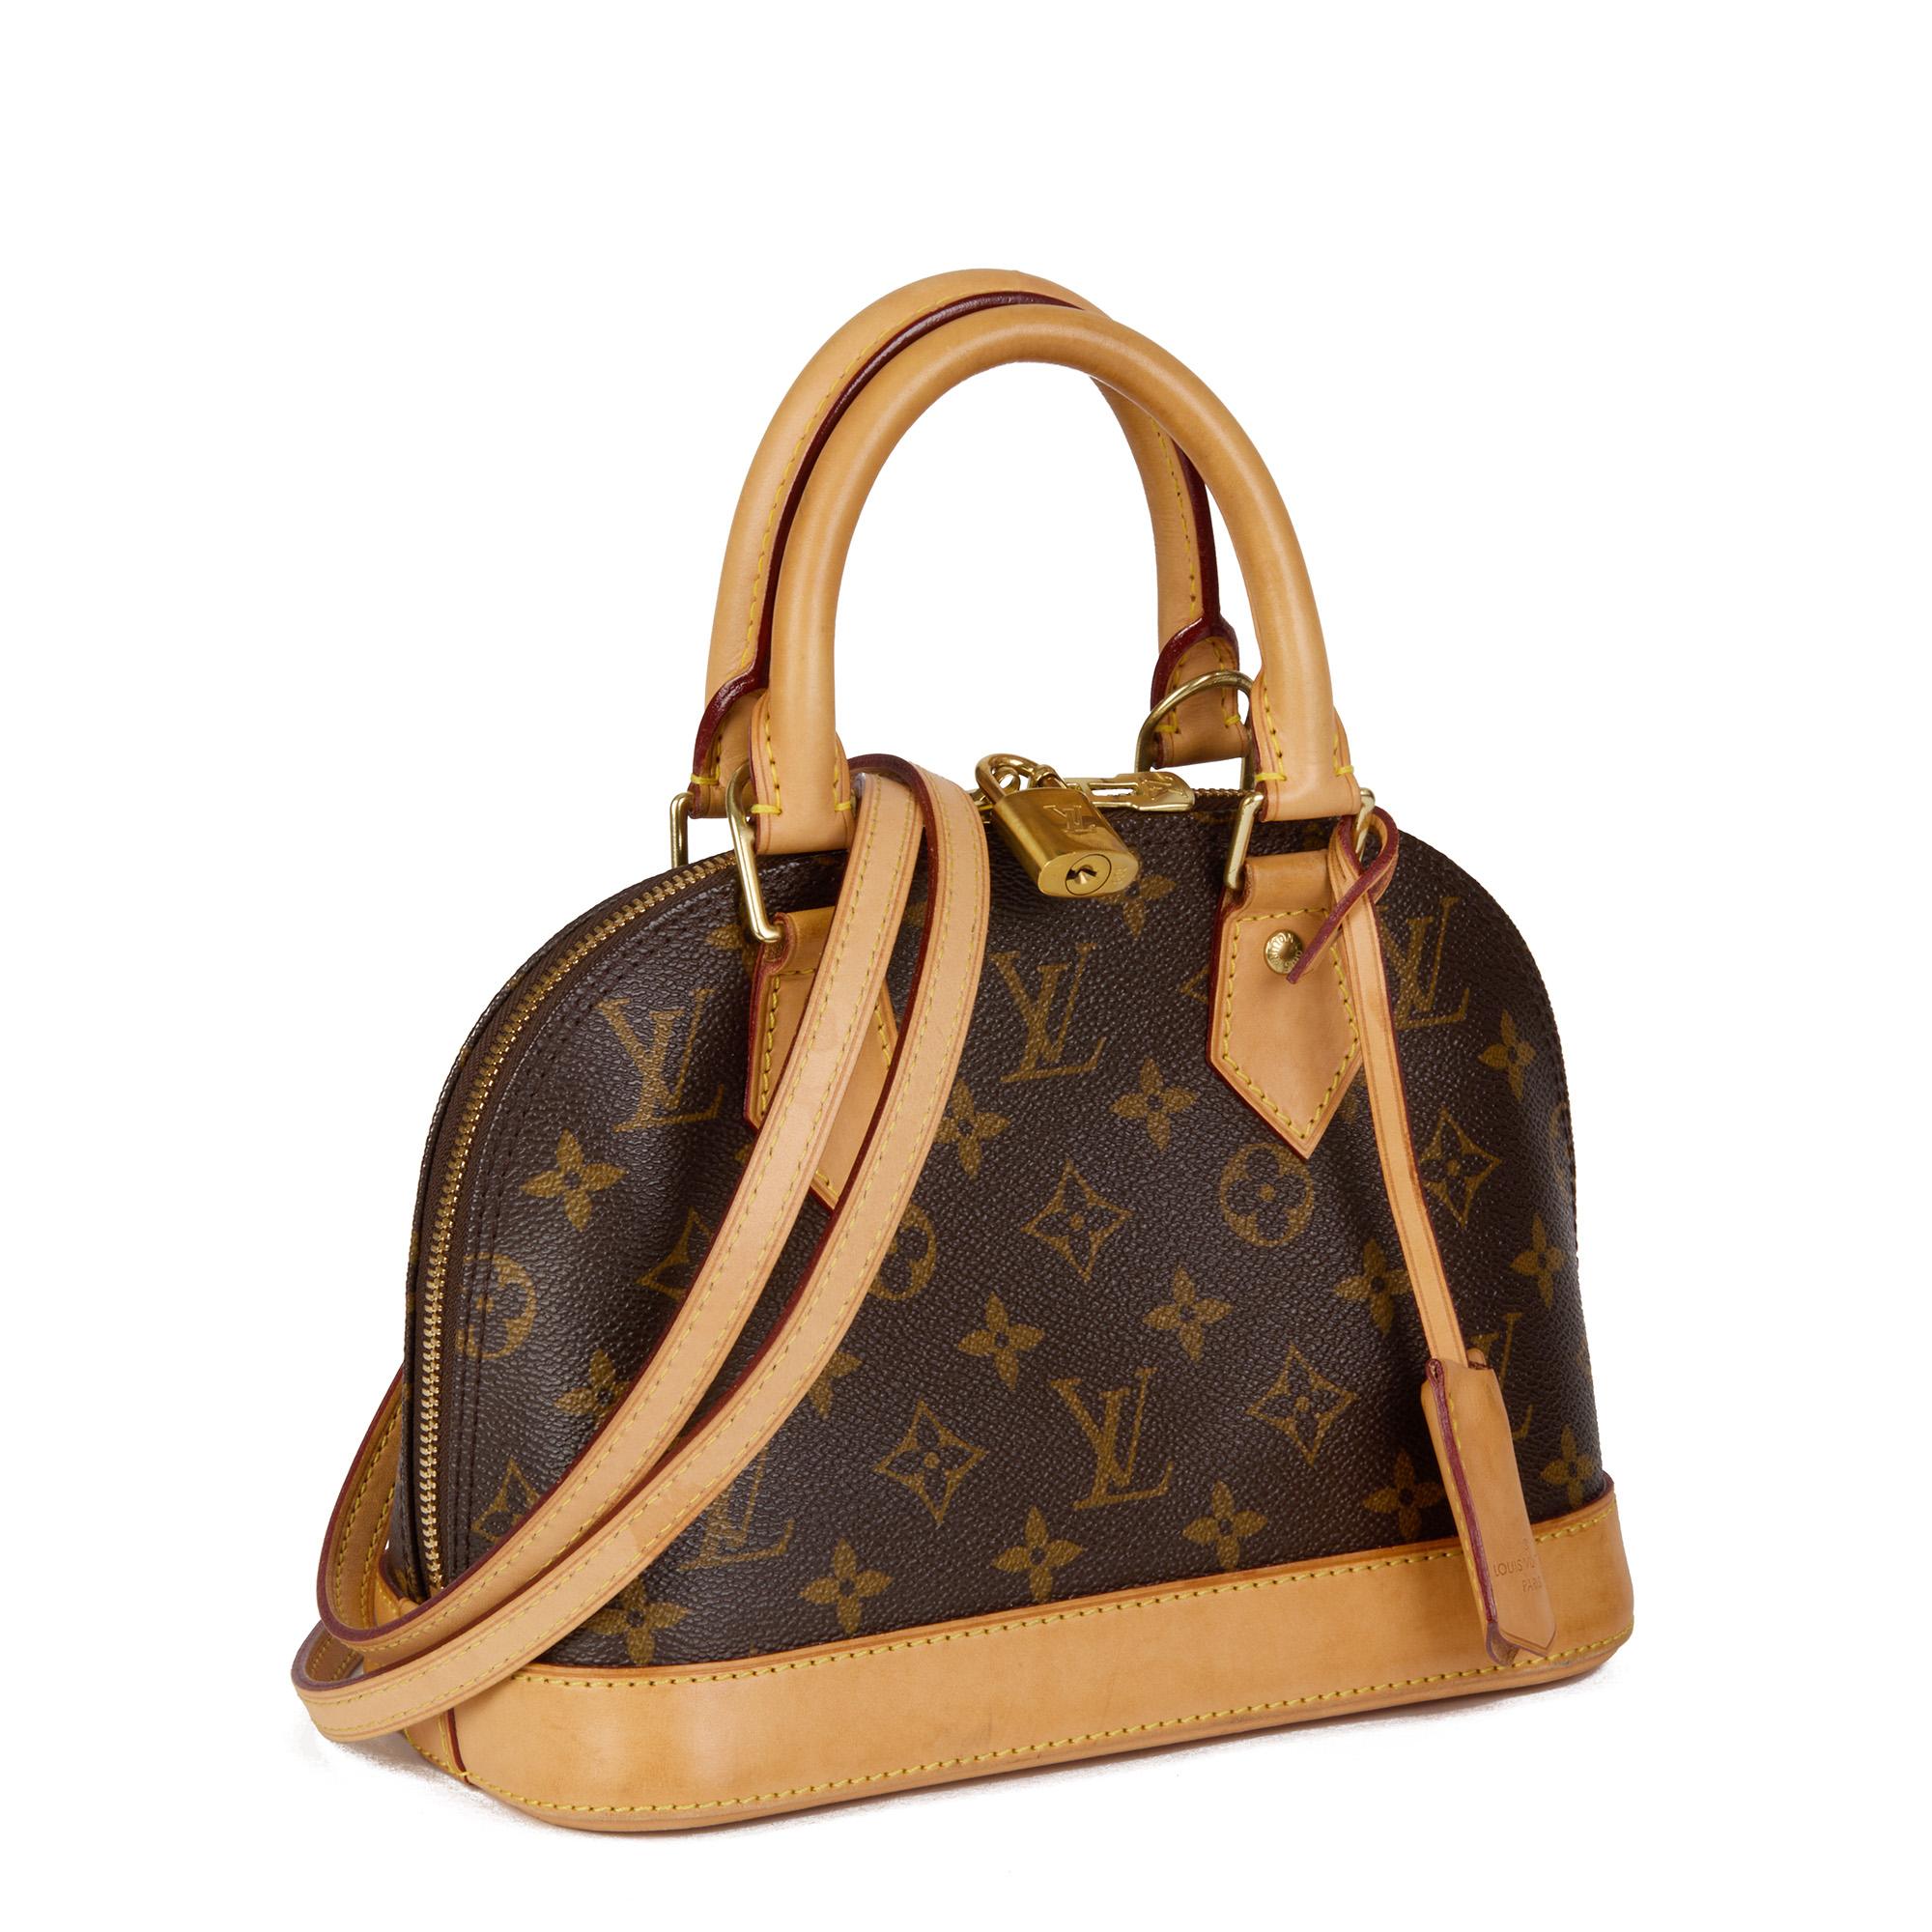 LOUIS VUITTON
Brown Monogram Coated Canvas & Vachetta Leather Alma BB

Xupes Reference: CB613
Serial Number: SO4163
Age (Circa): 2013
Accompanied By: Louis Vuitton Dust Bag, Box, Shoulder Strap, Padlock, Keys
Authenticity Details: Date Stamp (Made